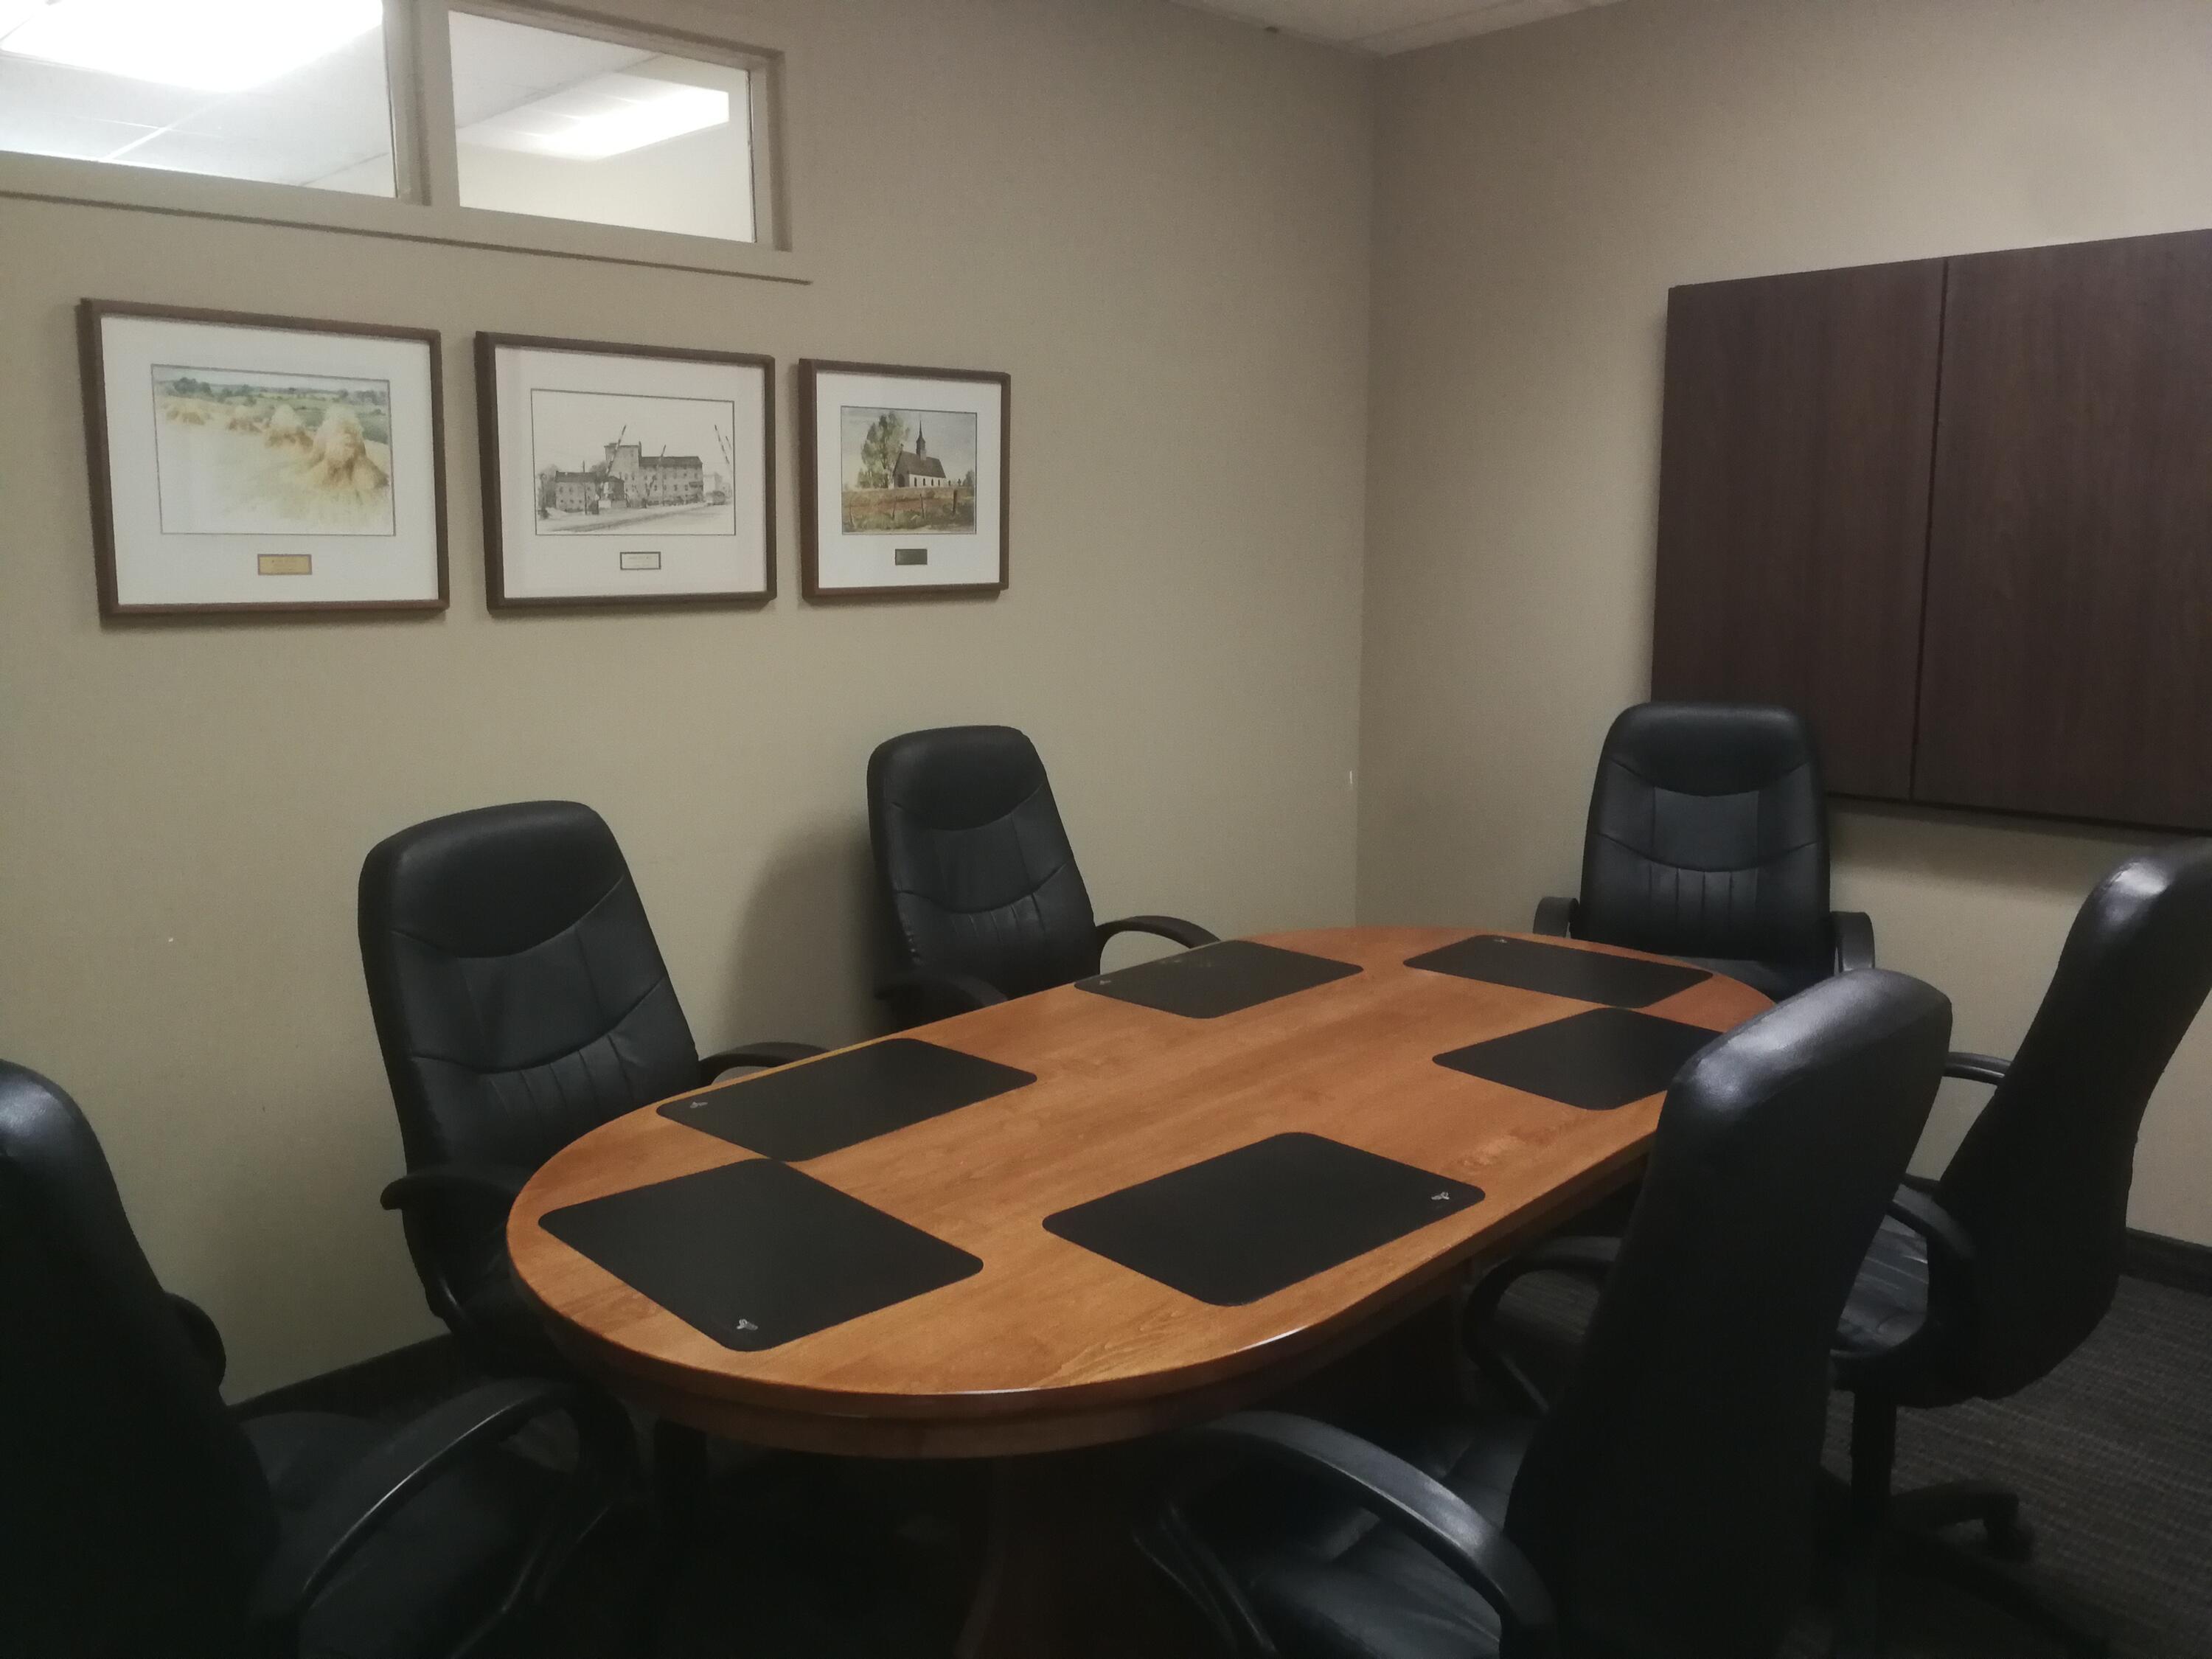 Small meeting room with wooden table and 6 chairs